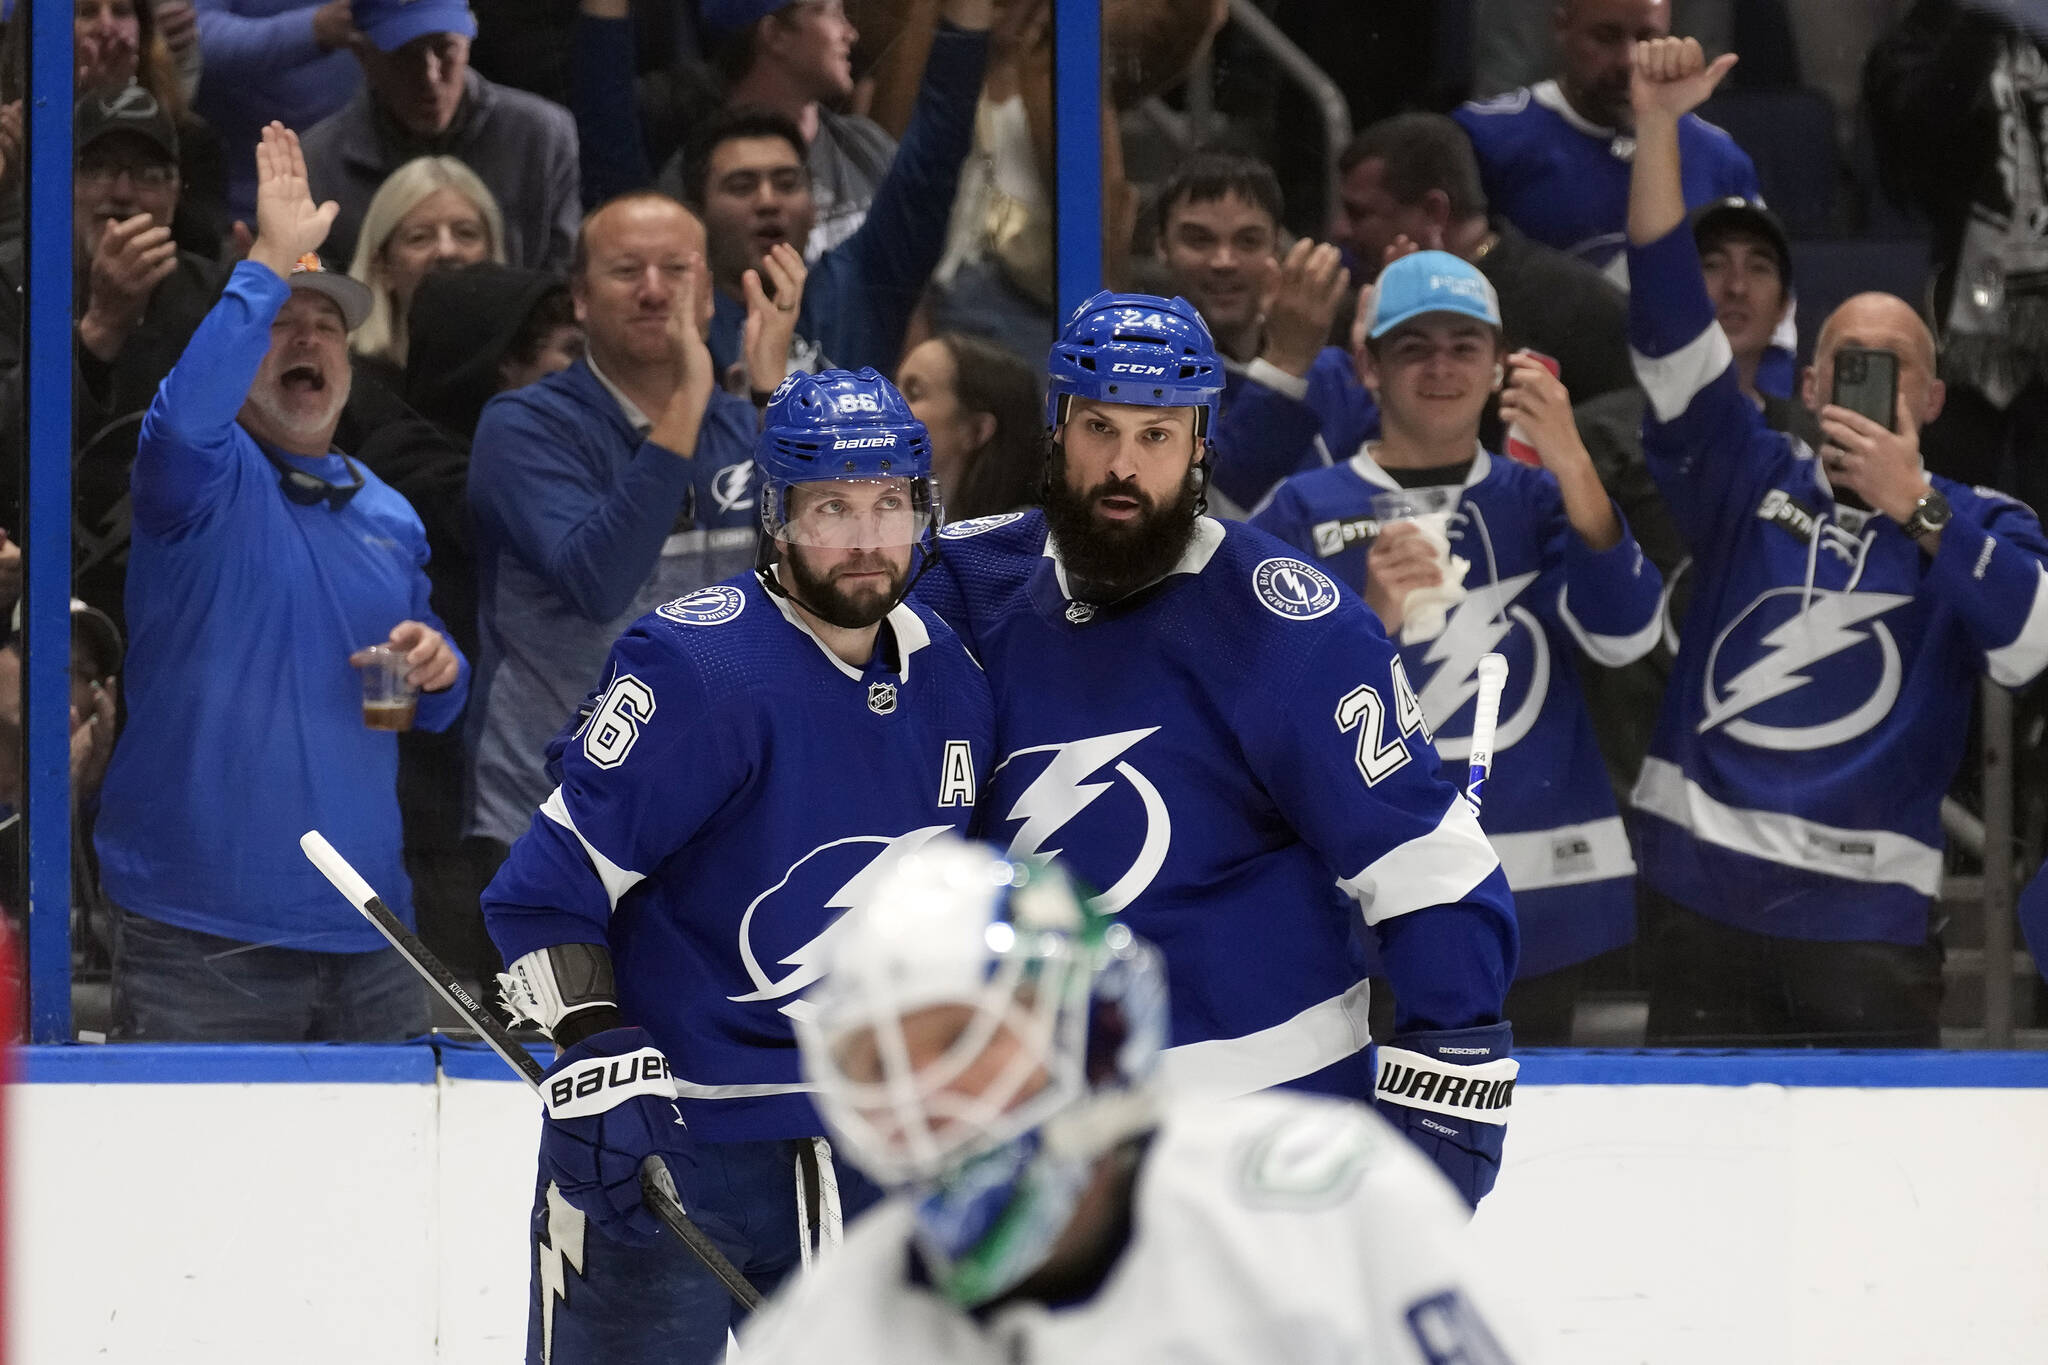 Tampa Bay Lightning right wing Nikita Kucherov (86) celebrates his goal against the Vancouver Canucks with defenseman Zach Bogosian (24) during the second period of an NHL hockey game Thursday, Jan. 12, 2023, in Tampa, Fla. (AP Photo/Chris O’Meara)